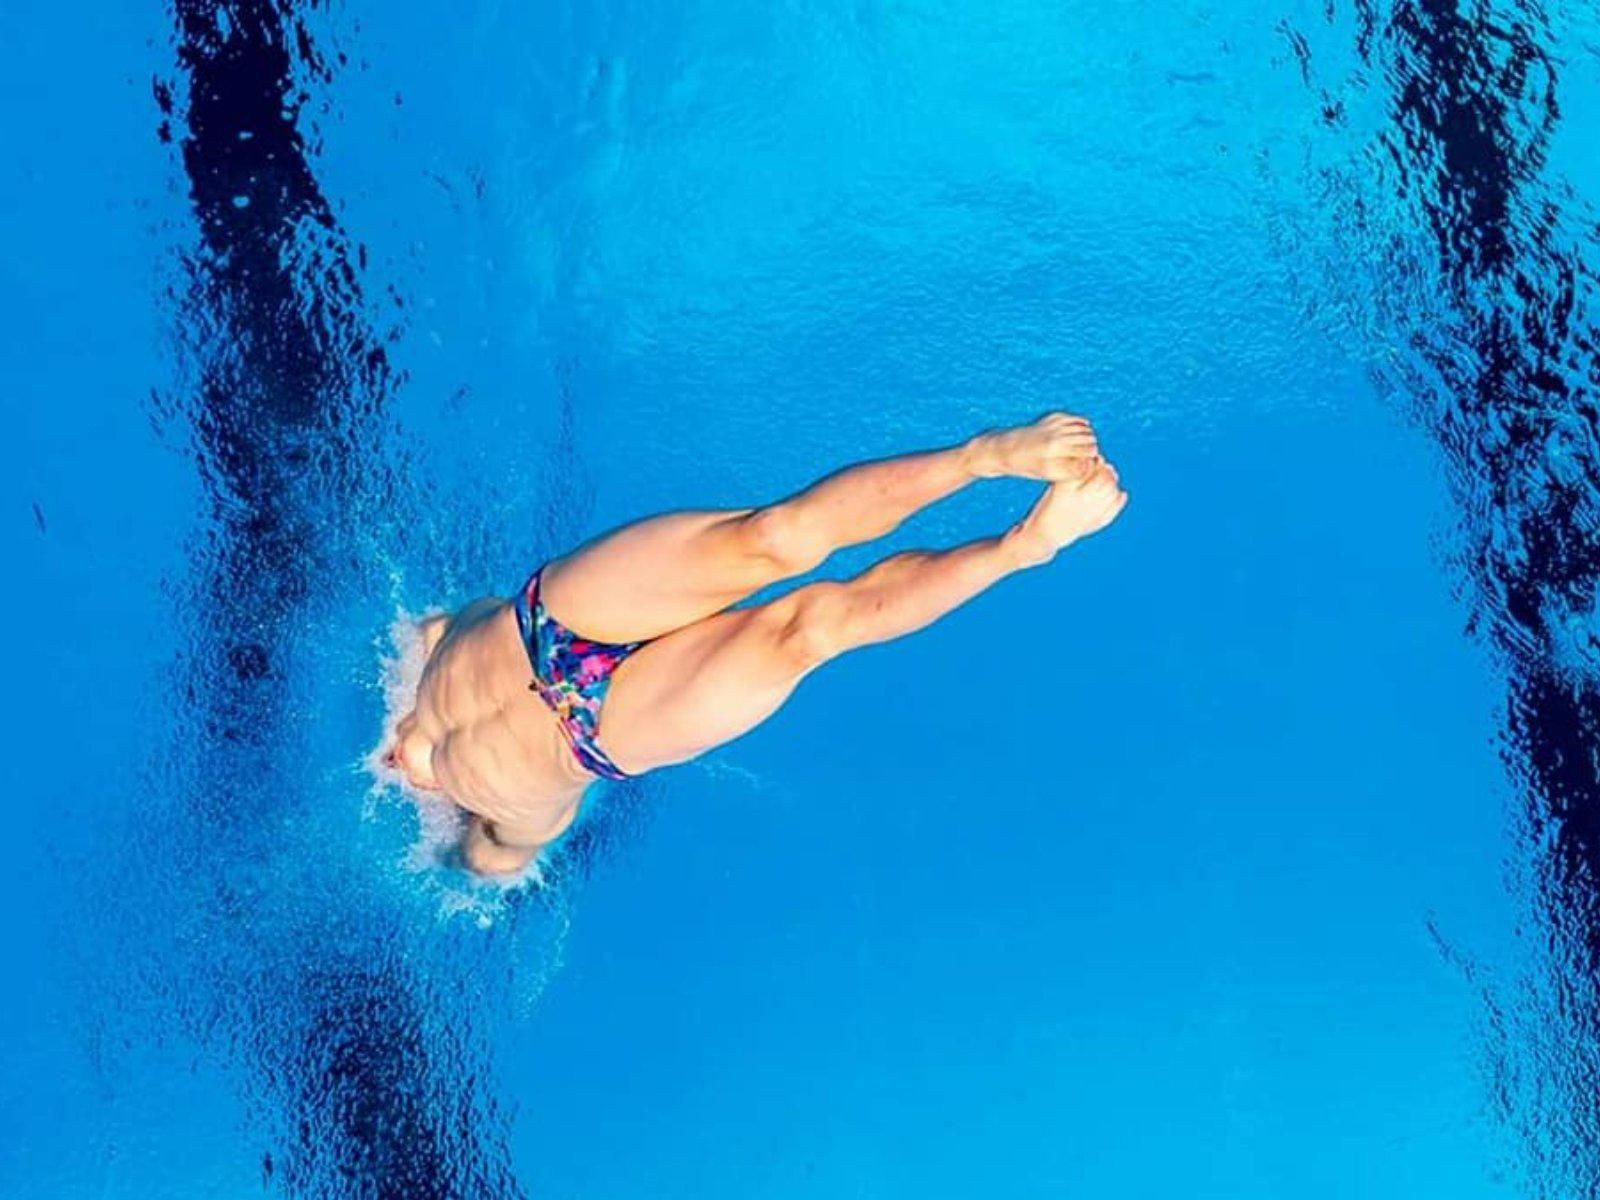 Nathan Brown has qualified for the World Diving Championships in Budapest this July.